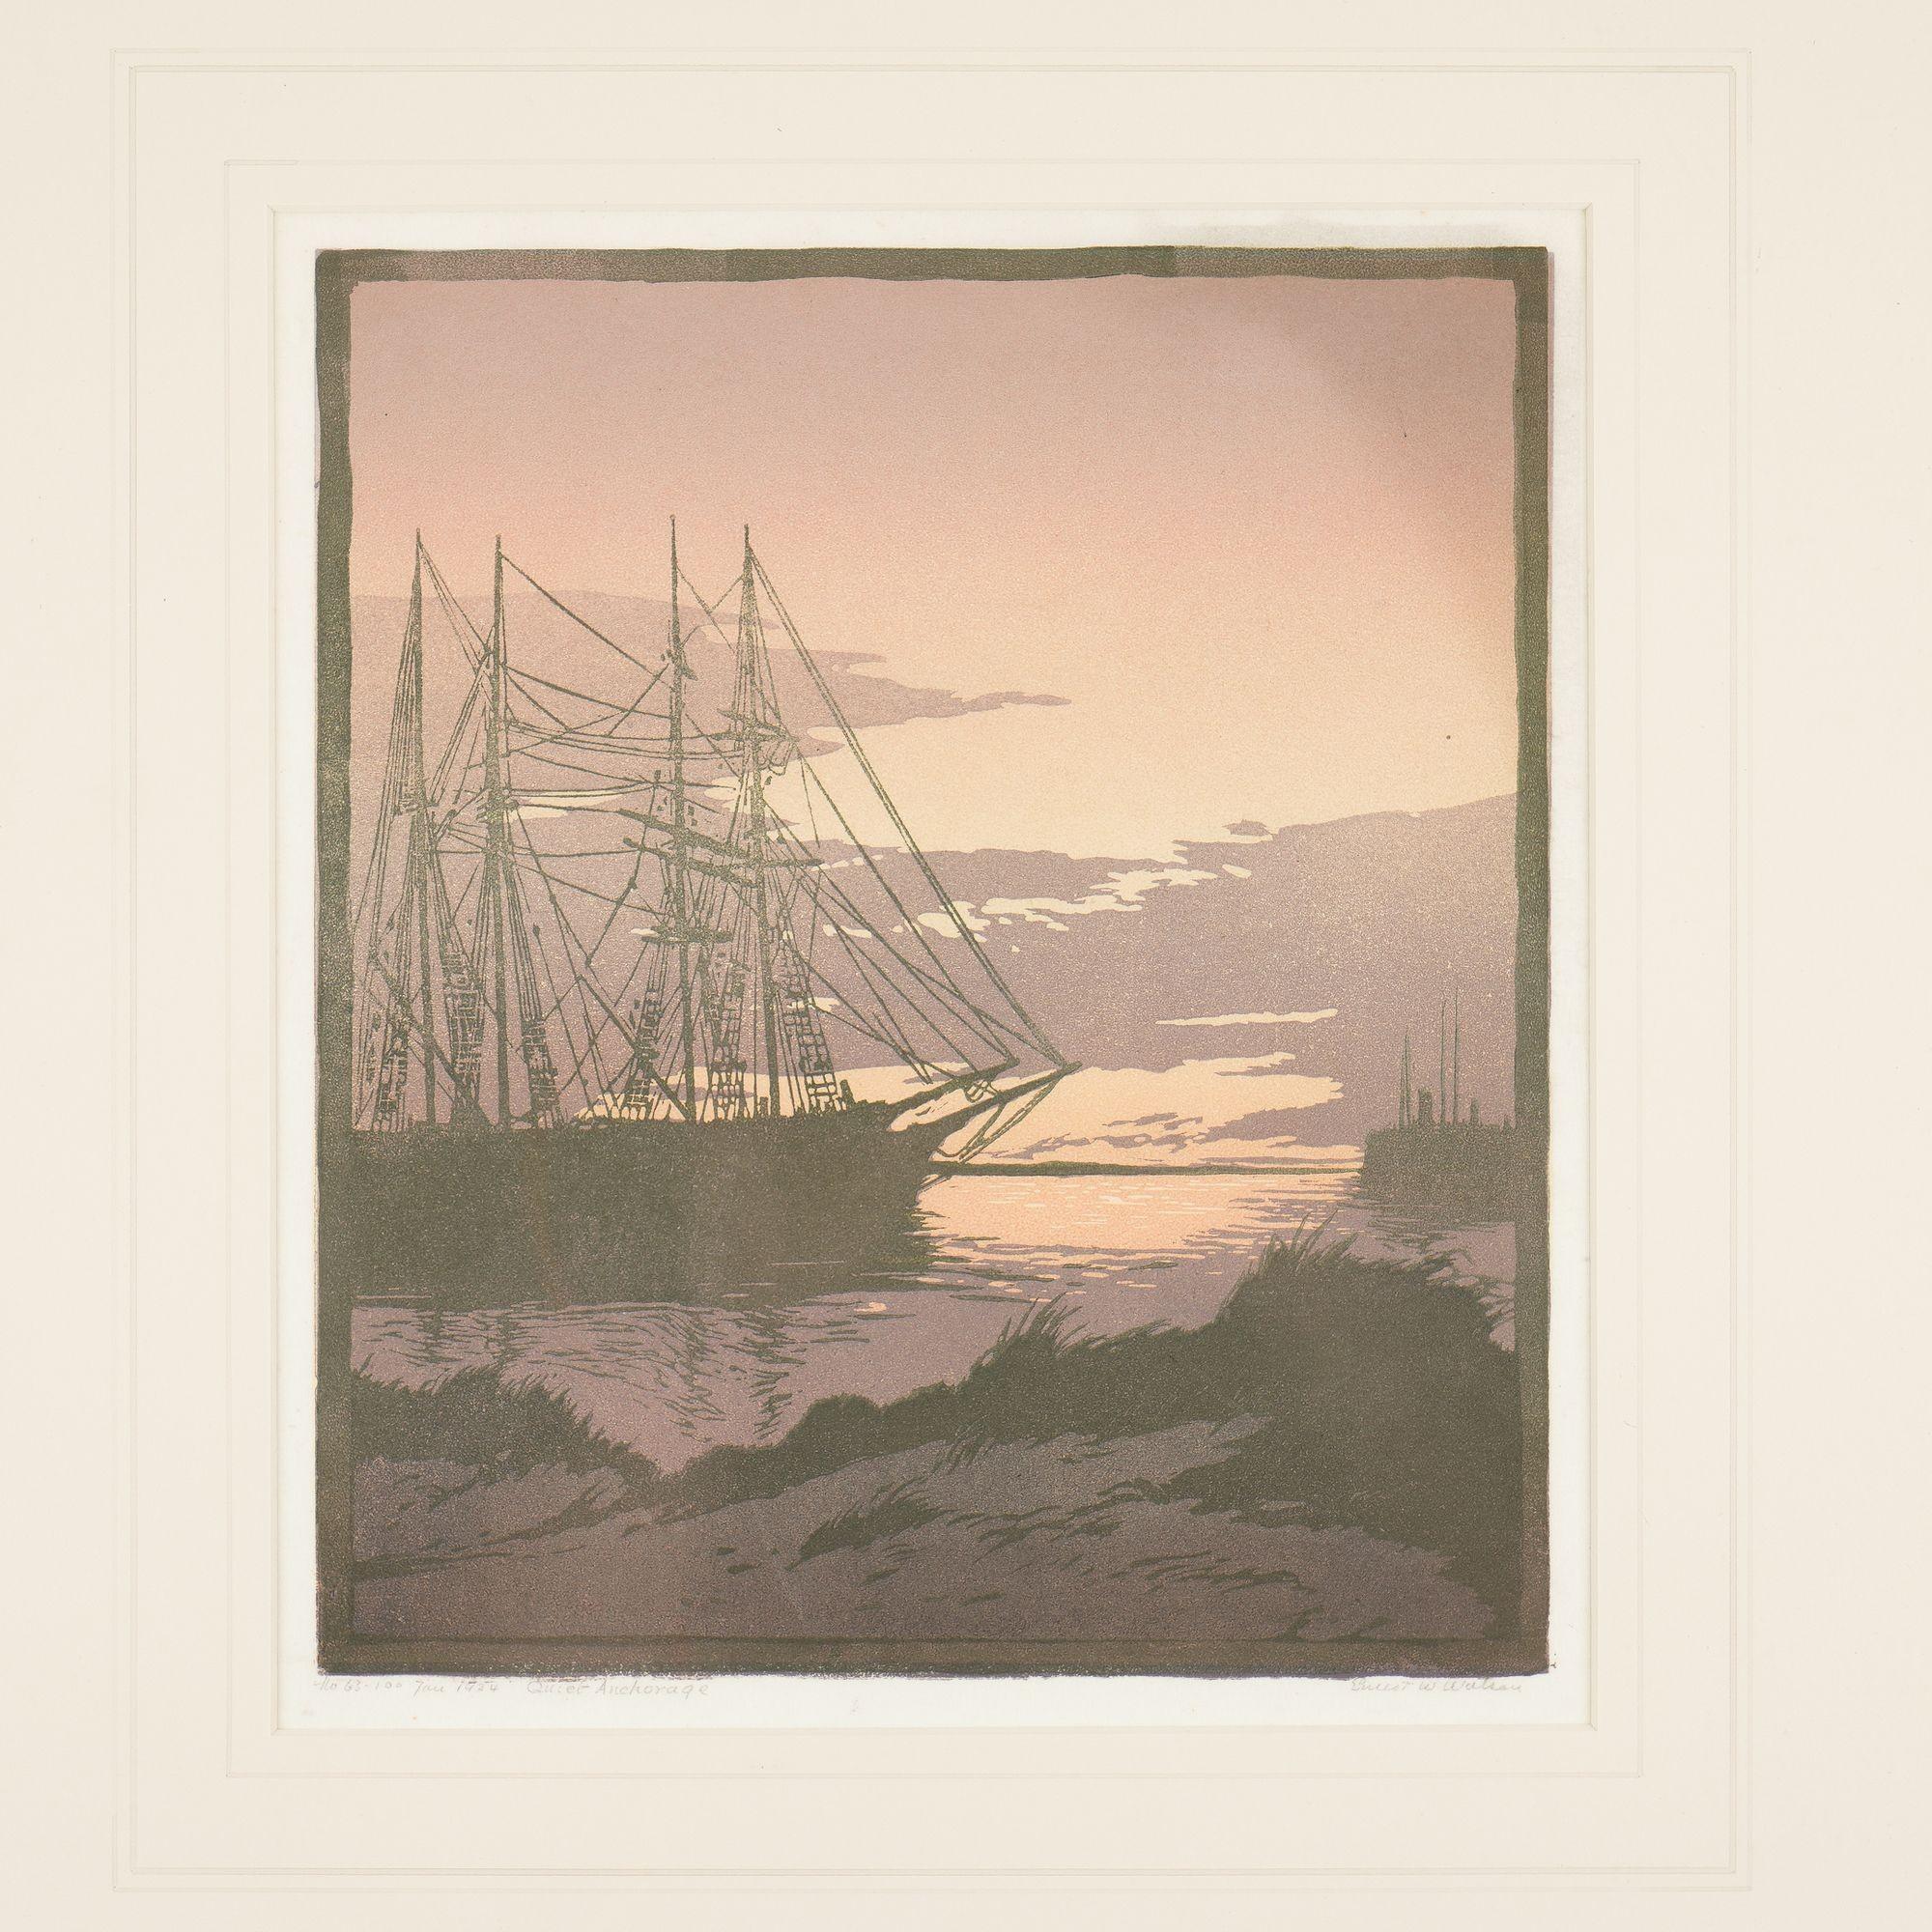 Linoleum block print of a moored sailing vessel at sunset, rendered in soft pastel oranges and purples. Mounted in its original hand carved frame.

Numbered and dated in graphite
Signed in graphite, LR: Ernest W Watson

American, 1924.